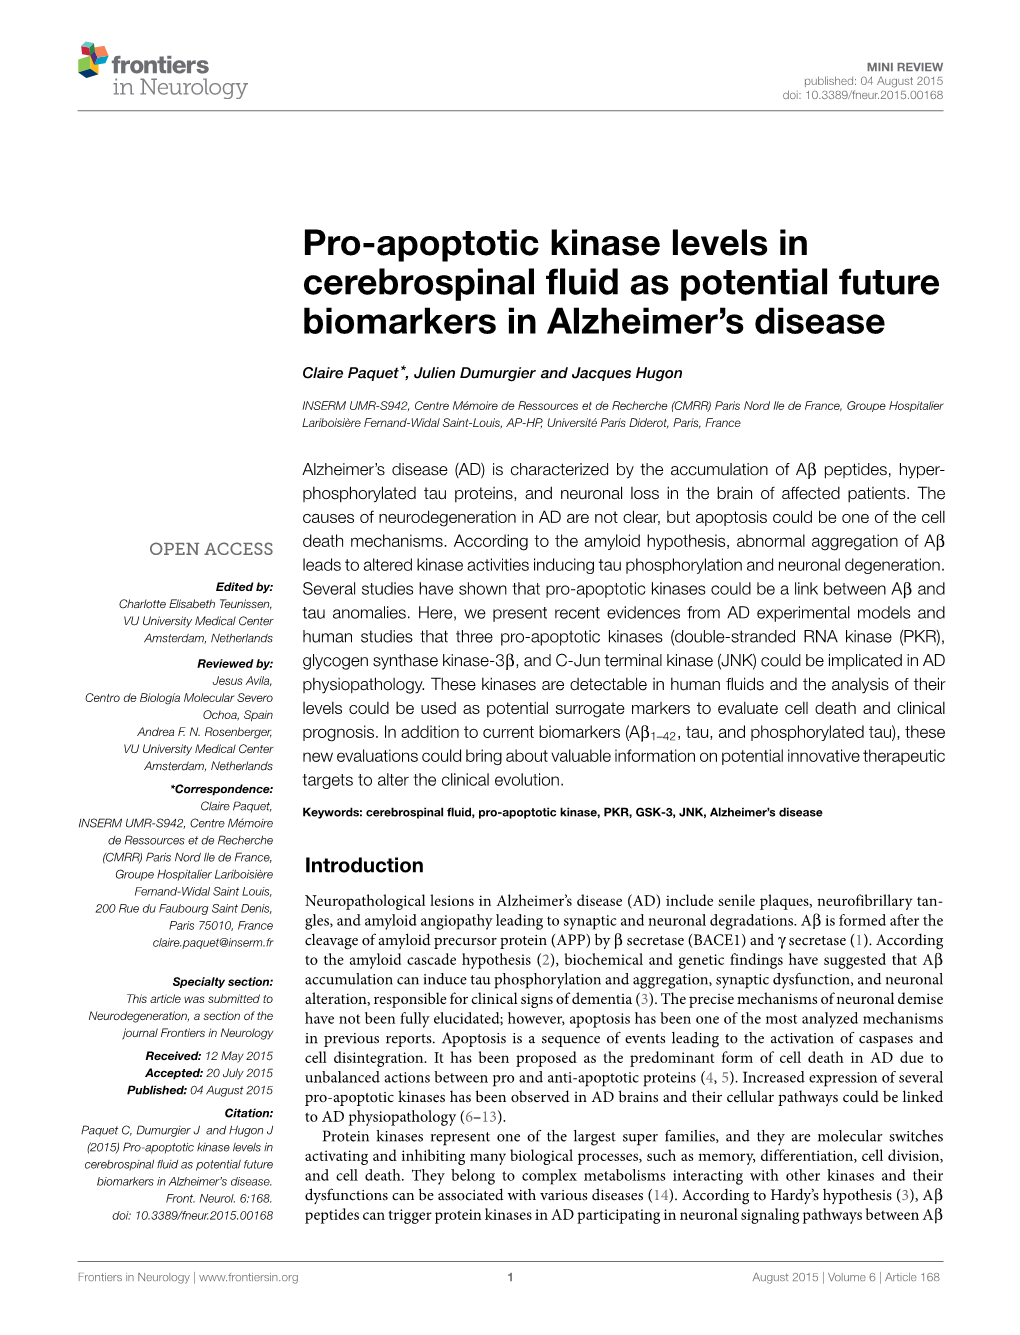 Pro-Apoptotic Kinase Levels in Cerebrospinal Fluid As Potential Future Biomarkers in Alzheimer’S Disease